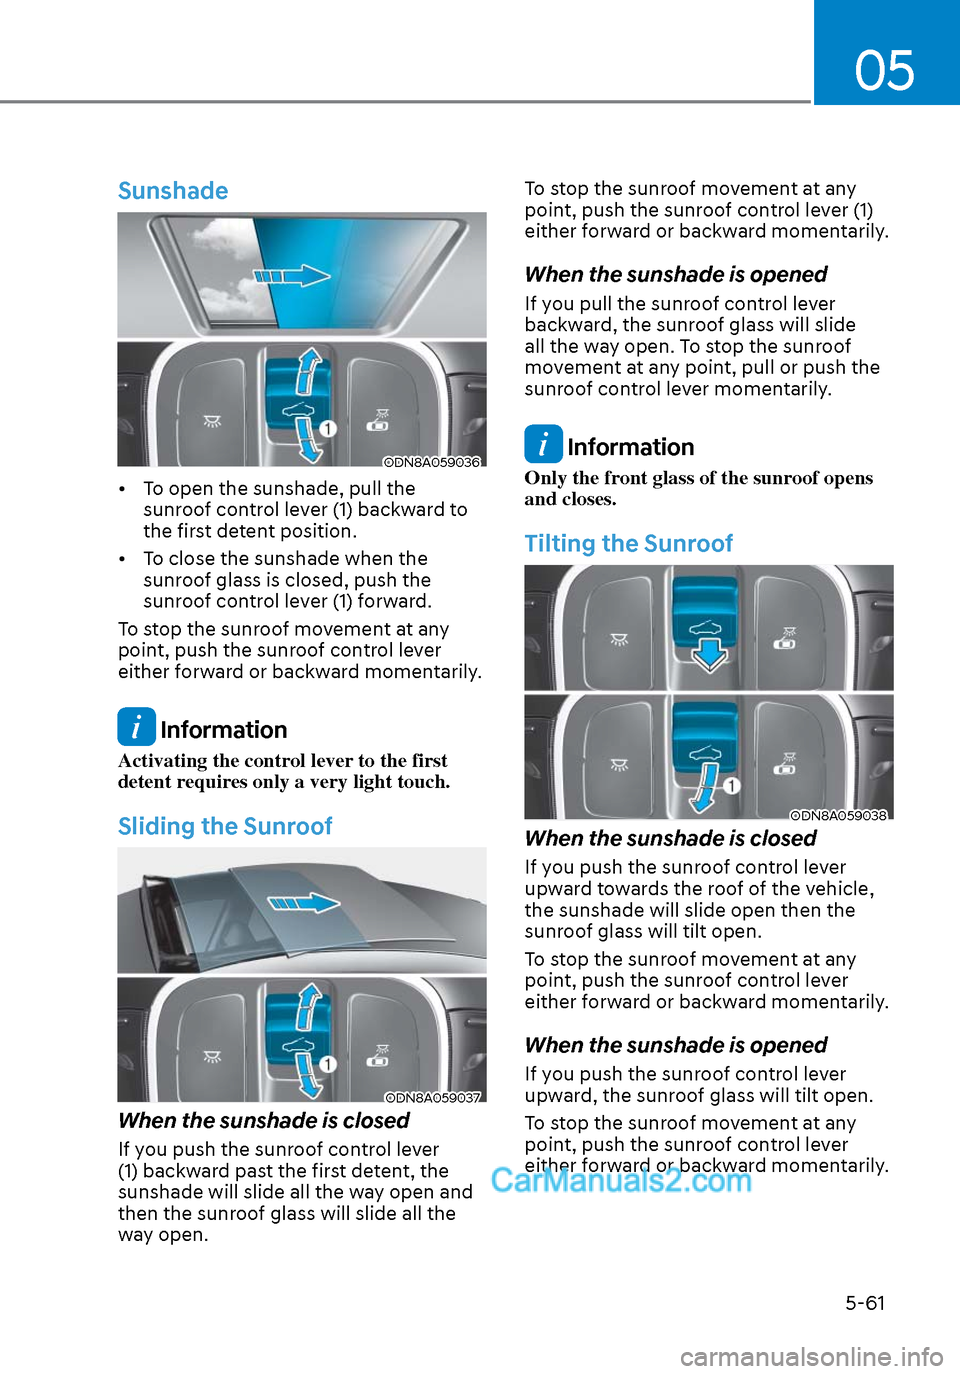 Hyundai Sonata 2020  Owners Manual 05
5-61
Sunshade
ODN8A059036ODN8A059036
•  To open the sunshade, pull the sunroof control lever (1) backward to 
the first detent position.
•  To close the sunshade when the  sunroof glass is clos